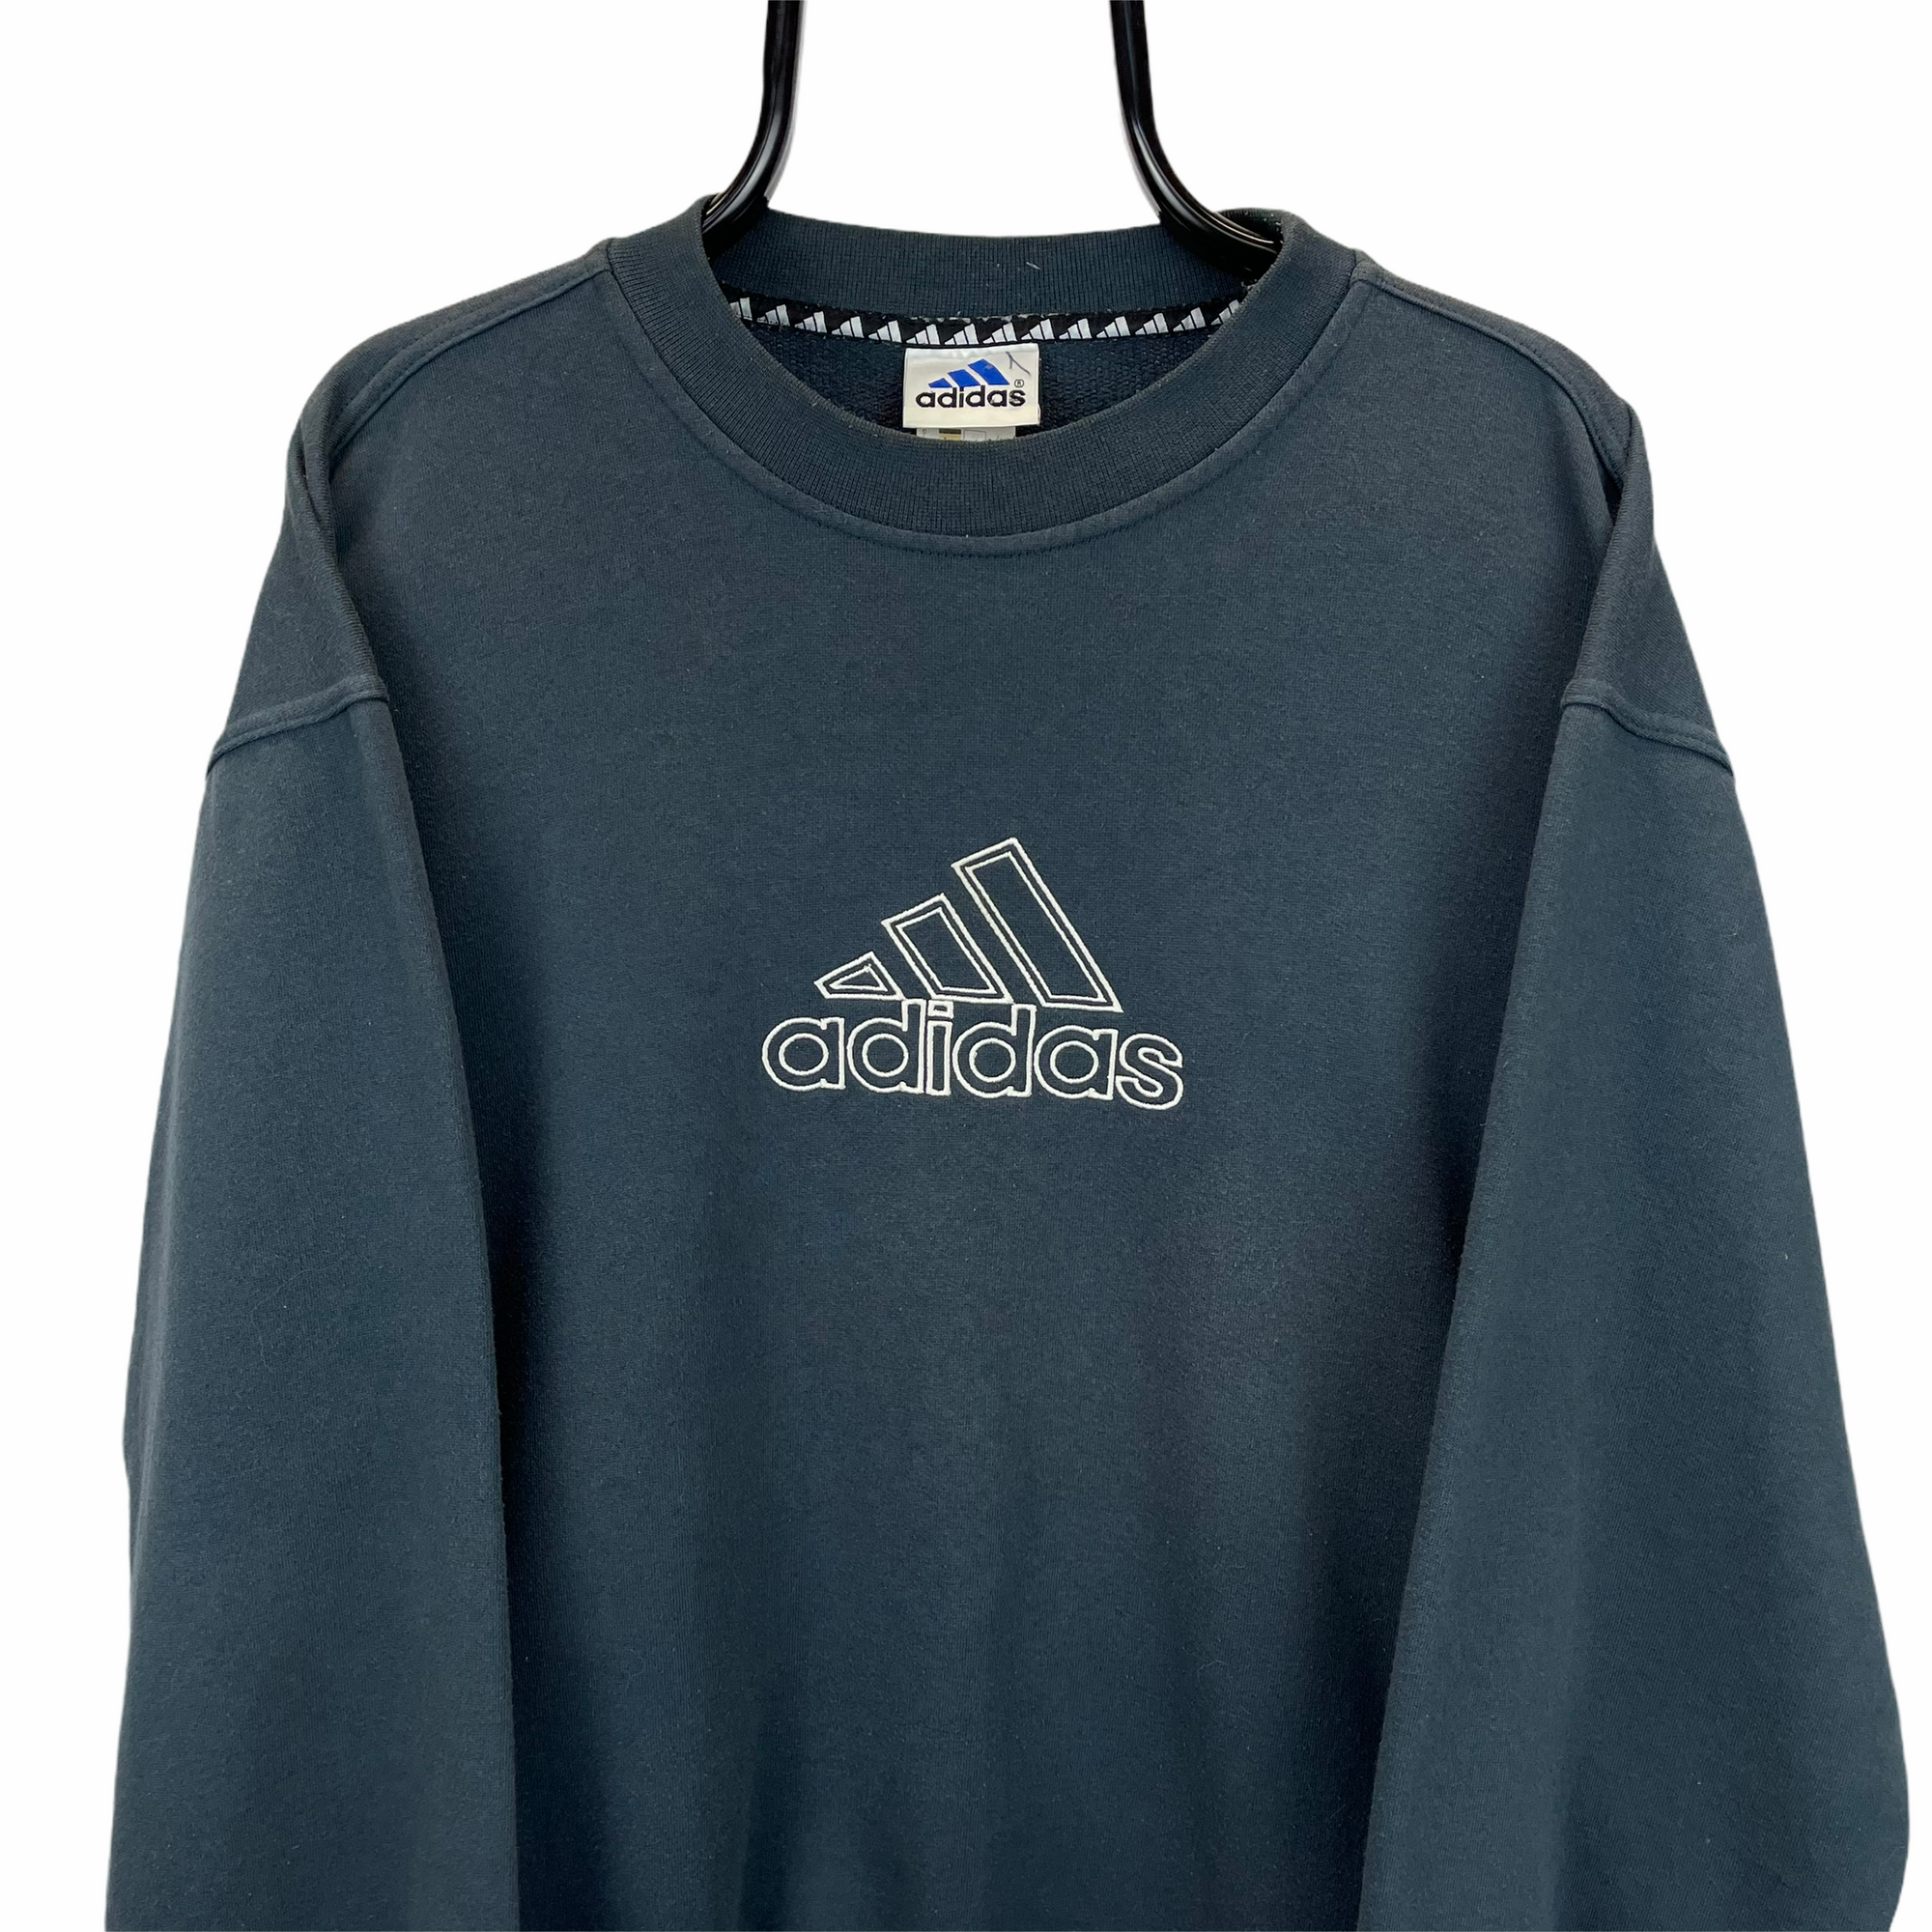 Vintage 90s Adidas Spellout Sweatshirt in Washed Black - Men's Large/Women's XL